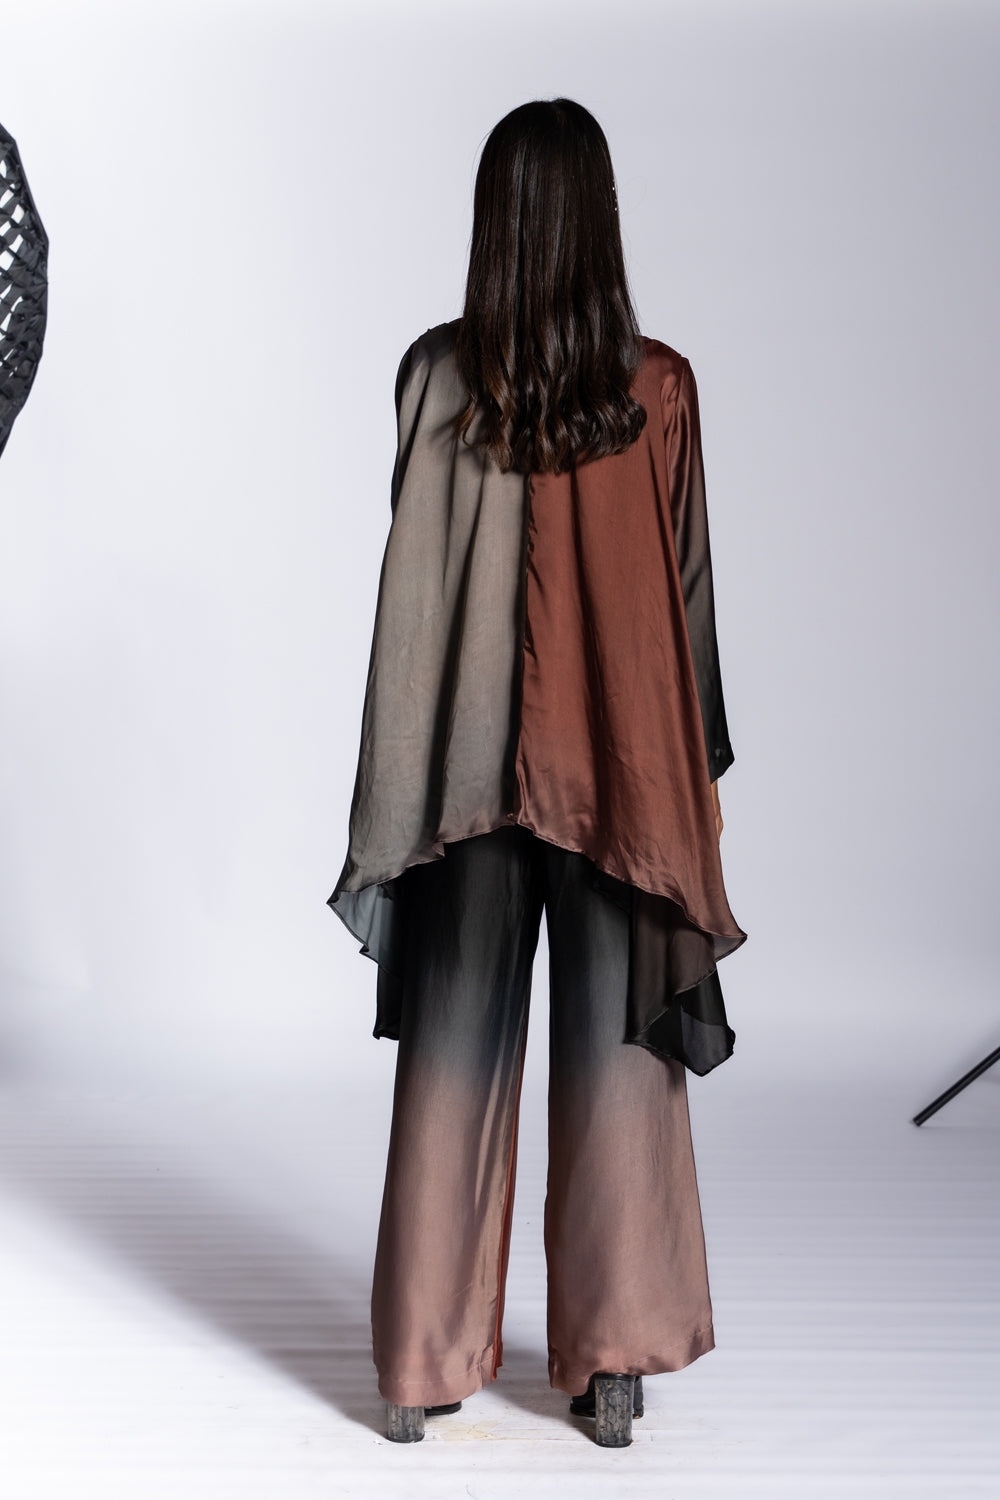 Ombre Asymmetrical Top with Pants